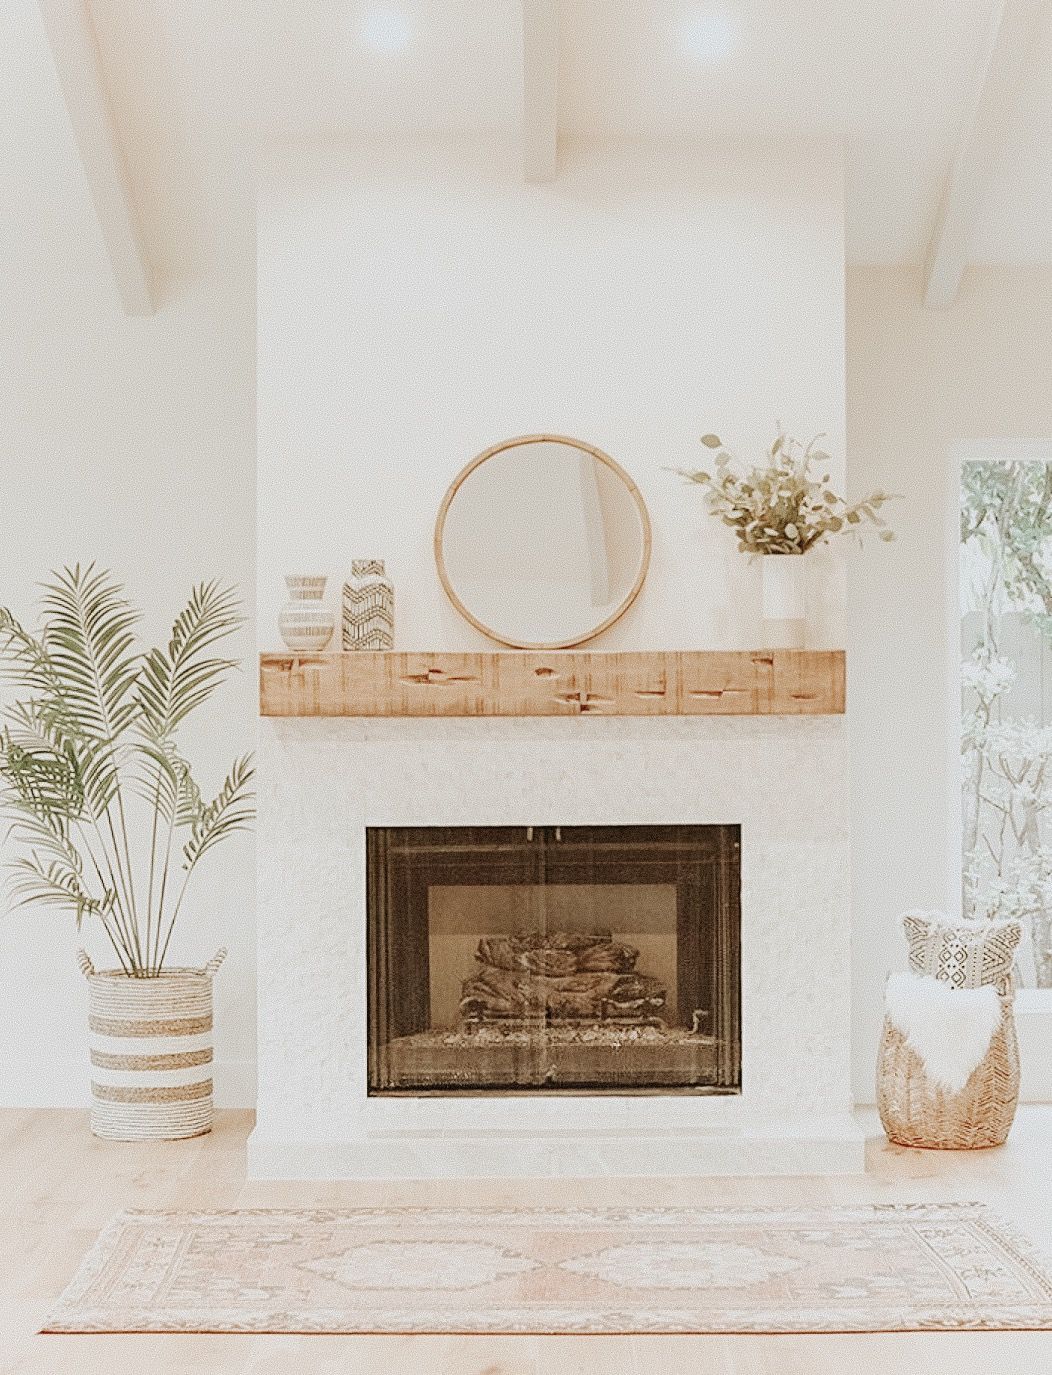 Black Friday Fireplace Deals Lovely 57 Best Farmhouse Fireplace Images In 2019